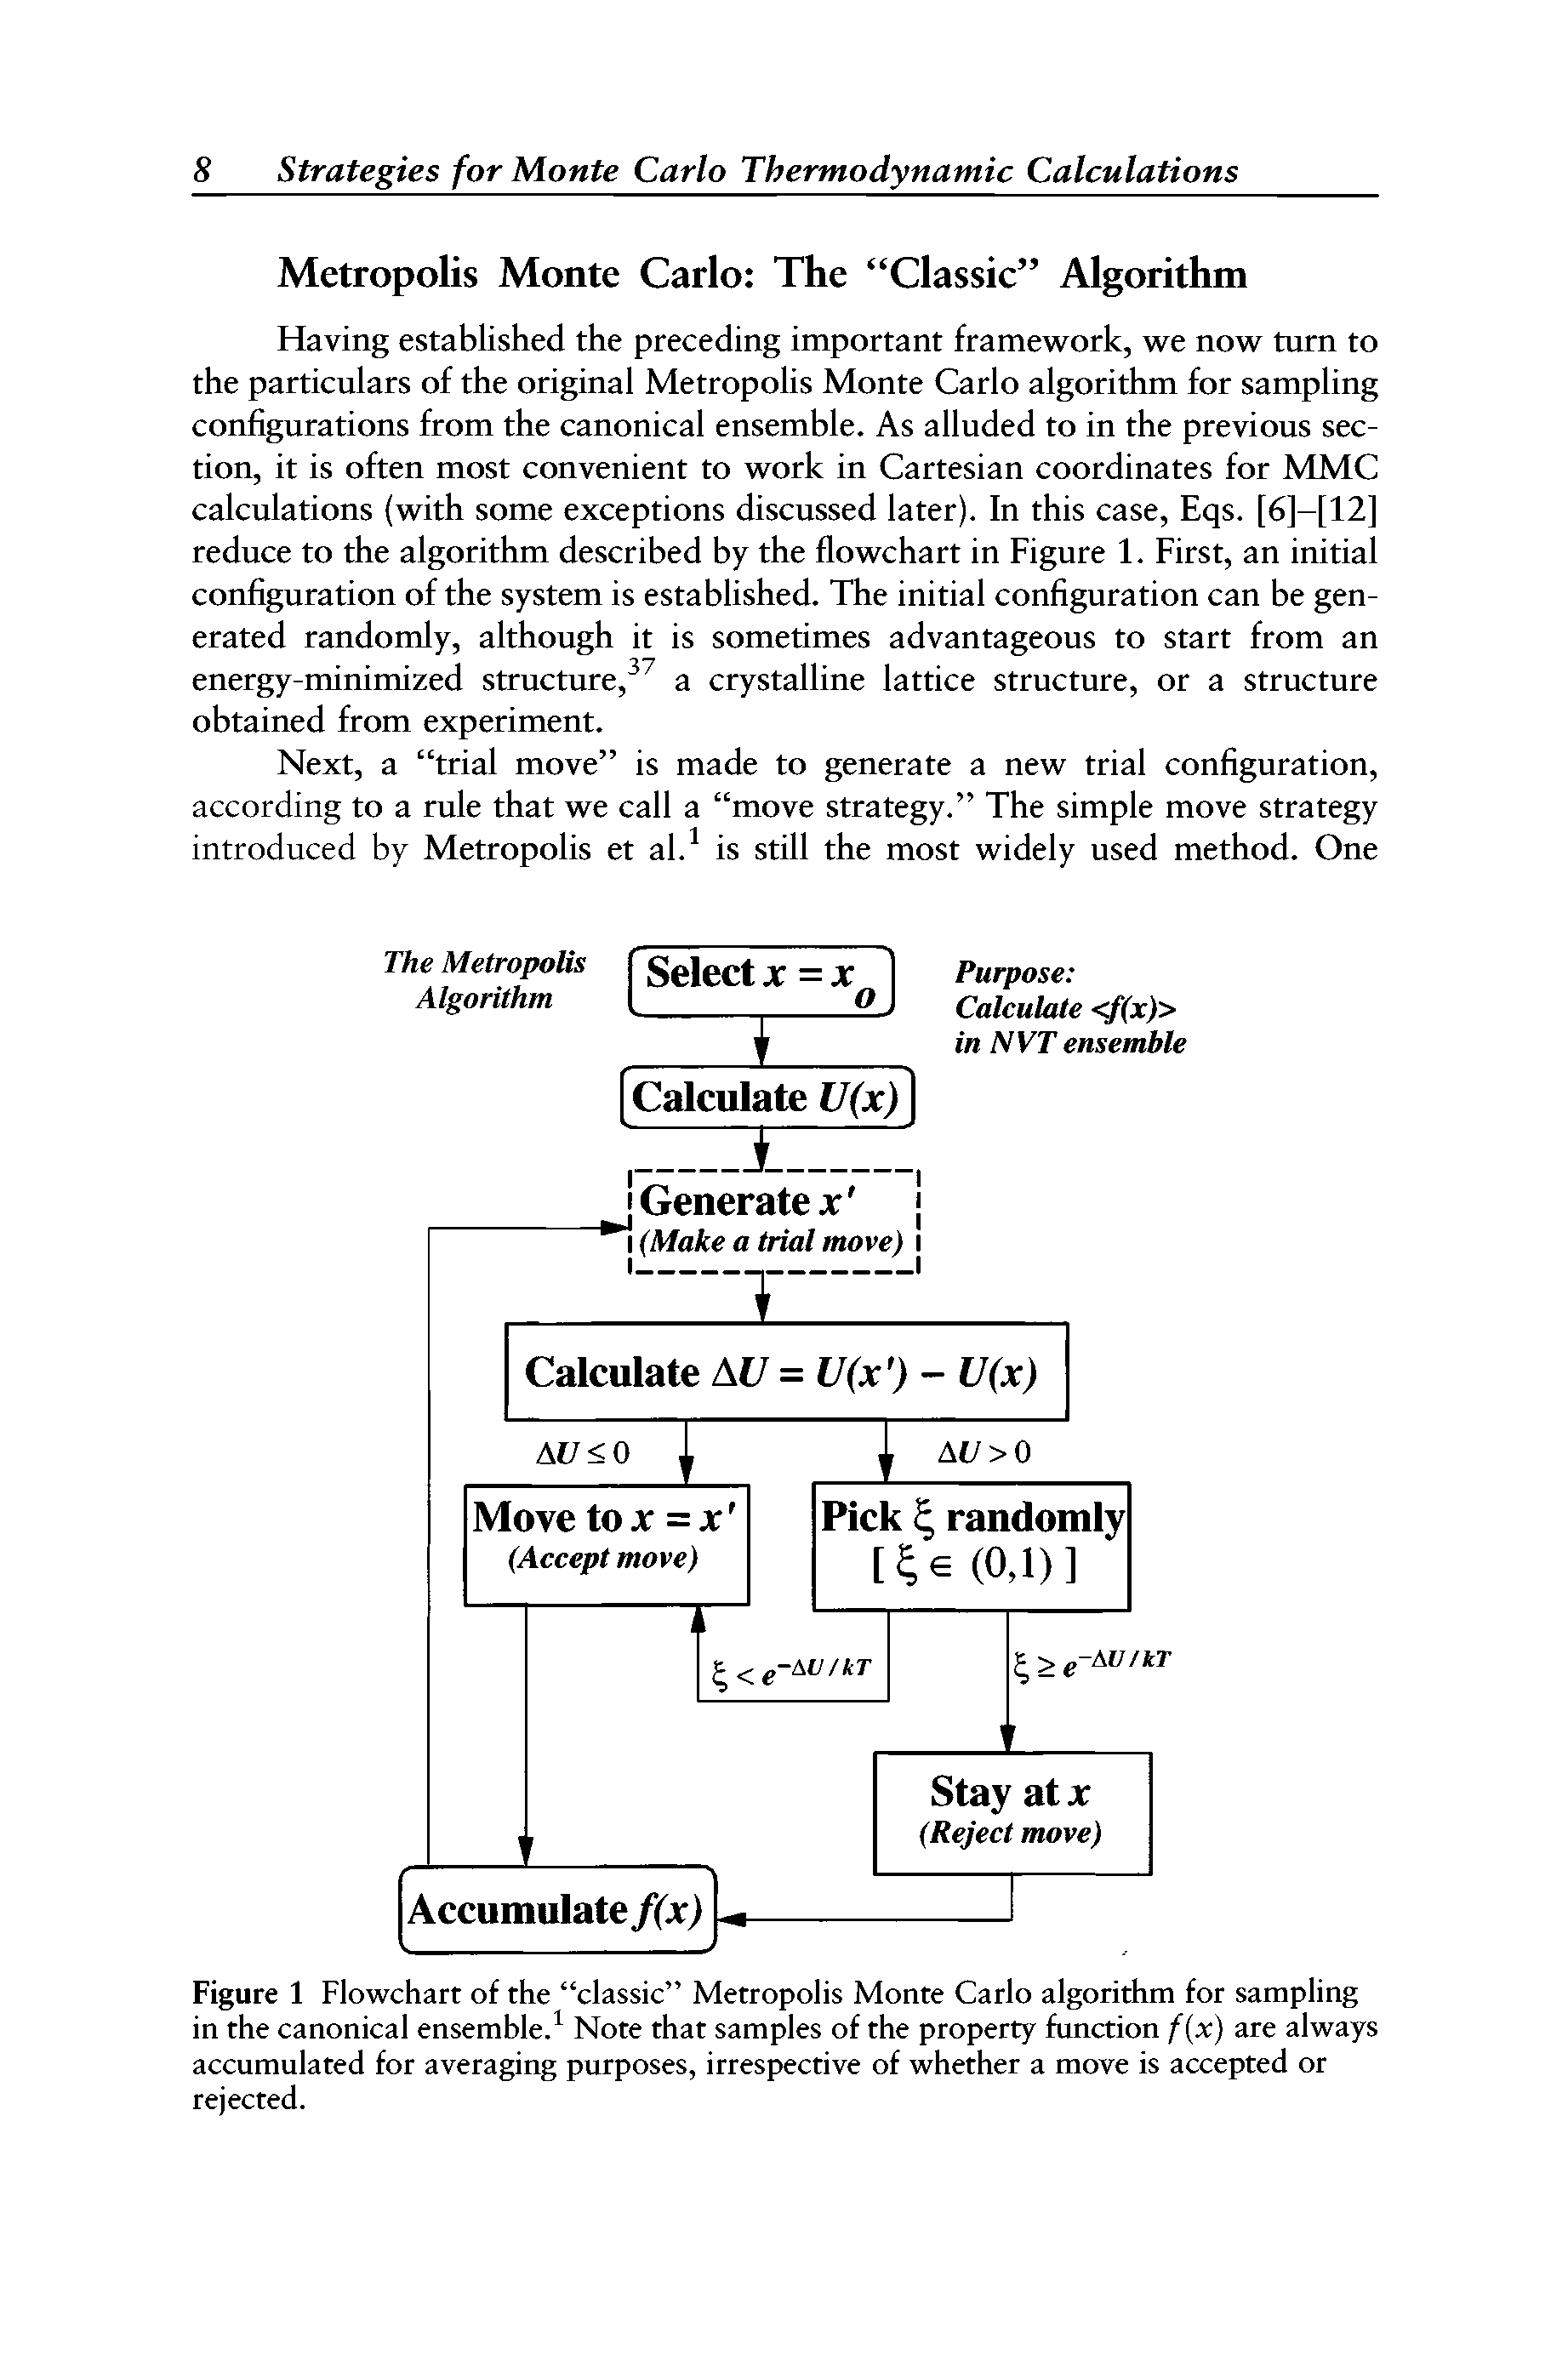 Figure 1 Flowchart of the classic Metropolis Monte Carlo algorithm for sampling in the canonical ensemble. Note that samples of the property function f(x) are always accumulated for averaging purposes, irrespective of whether a move is accepted or rejected.